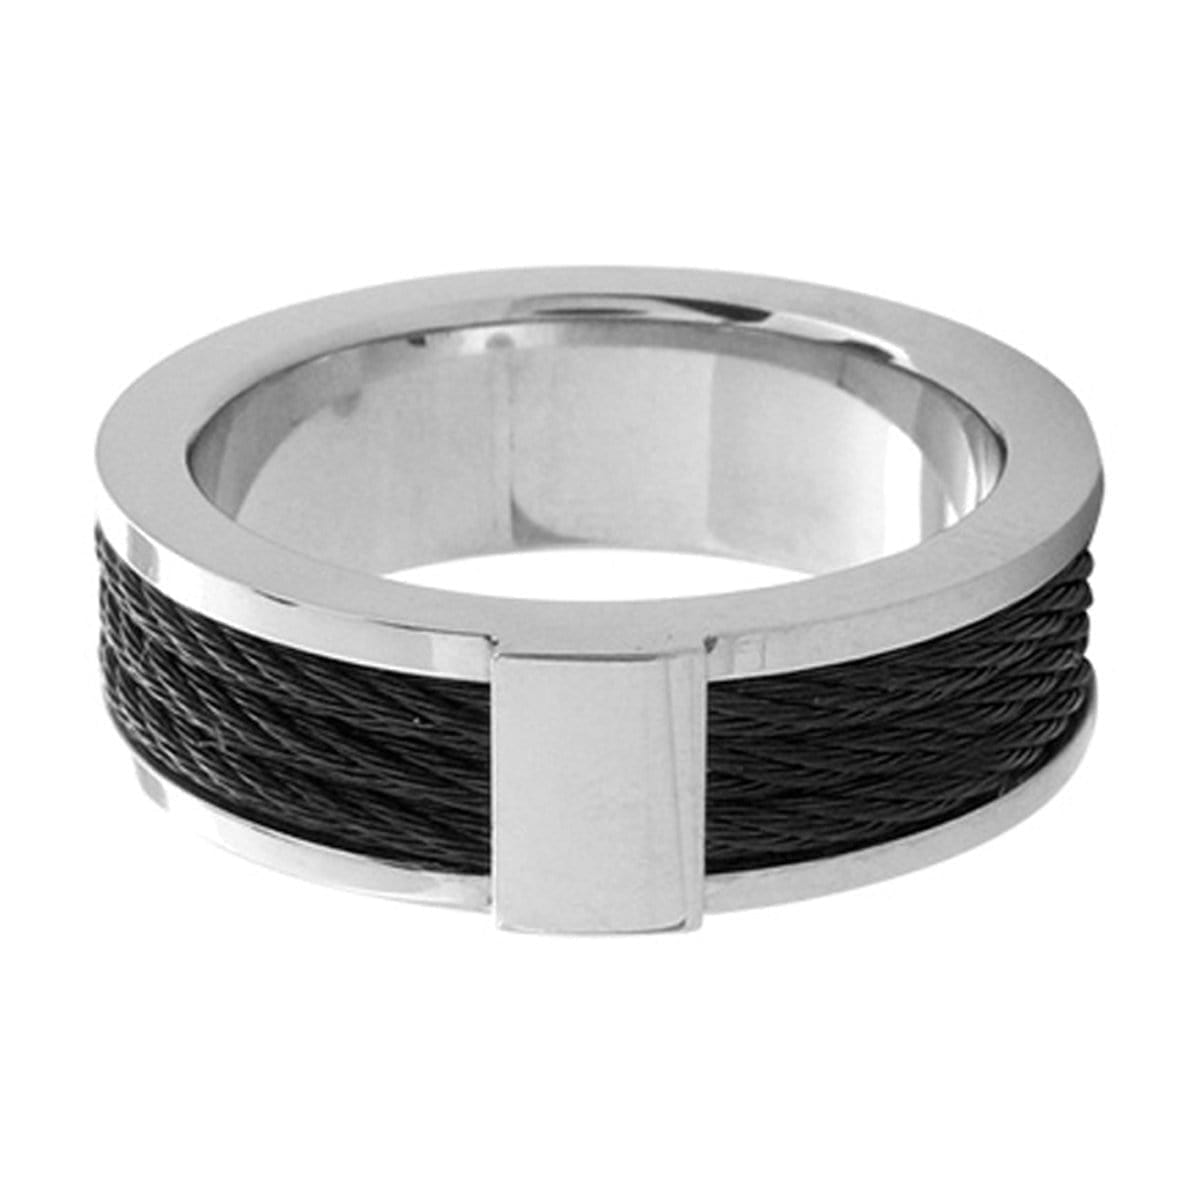 INOX JEWELRY Rings Black and Silver Tone Stainless Steel Ring with Three Inlaid Cables